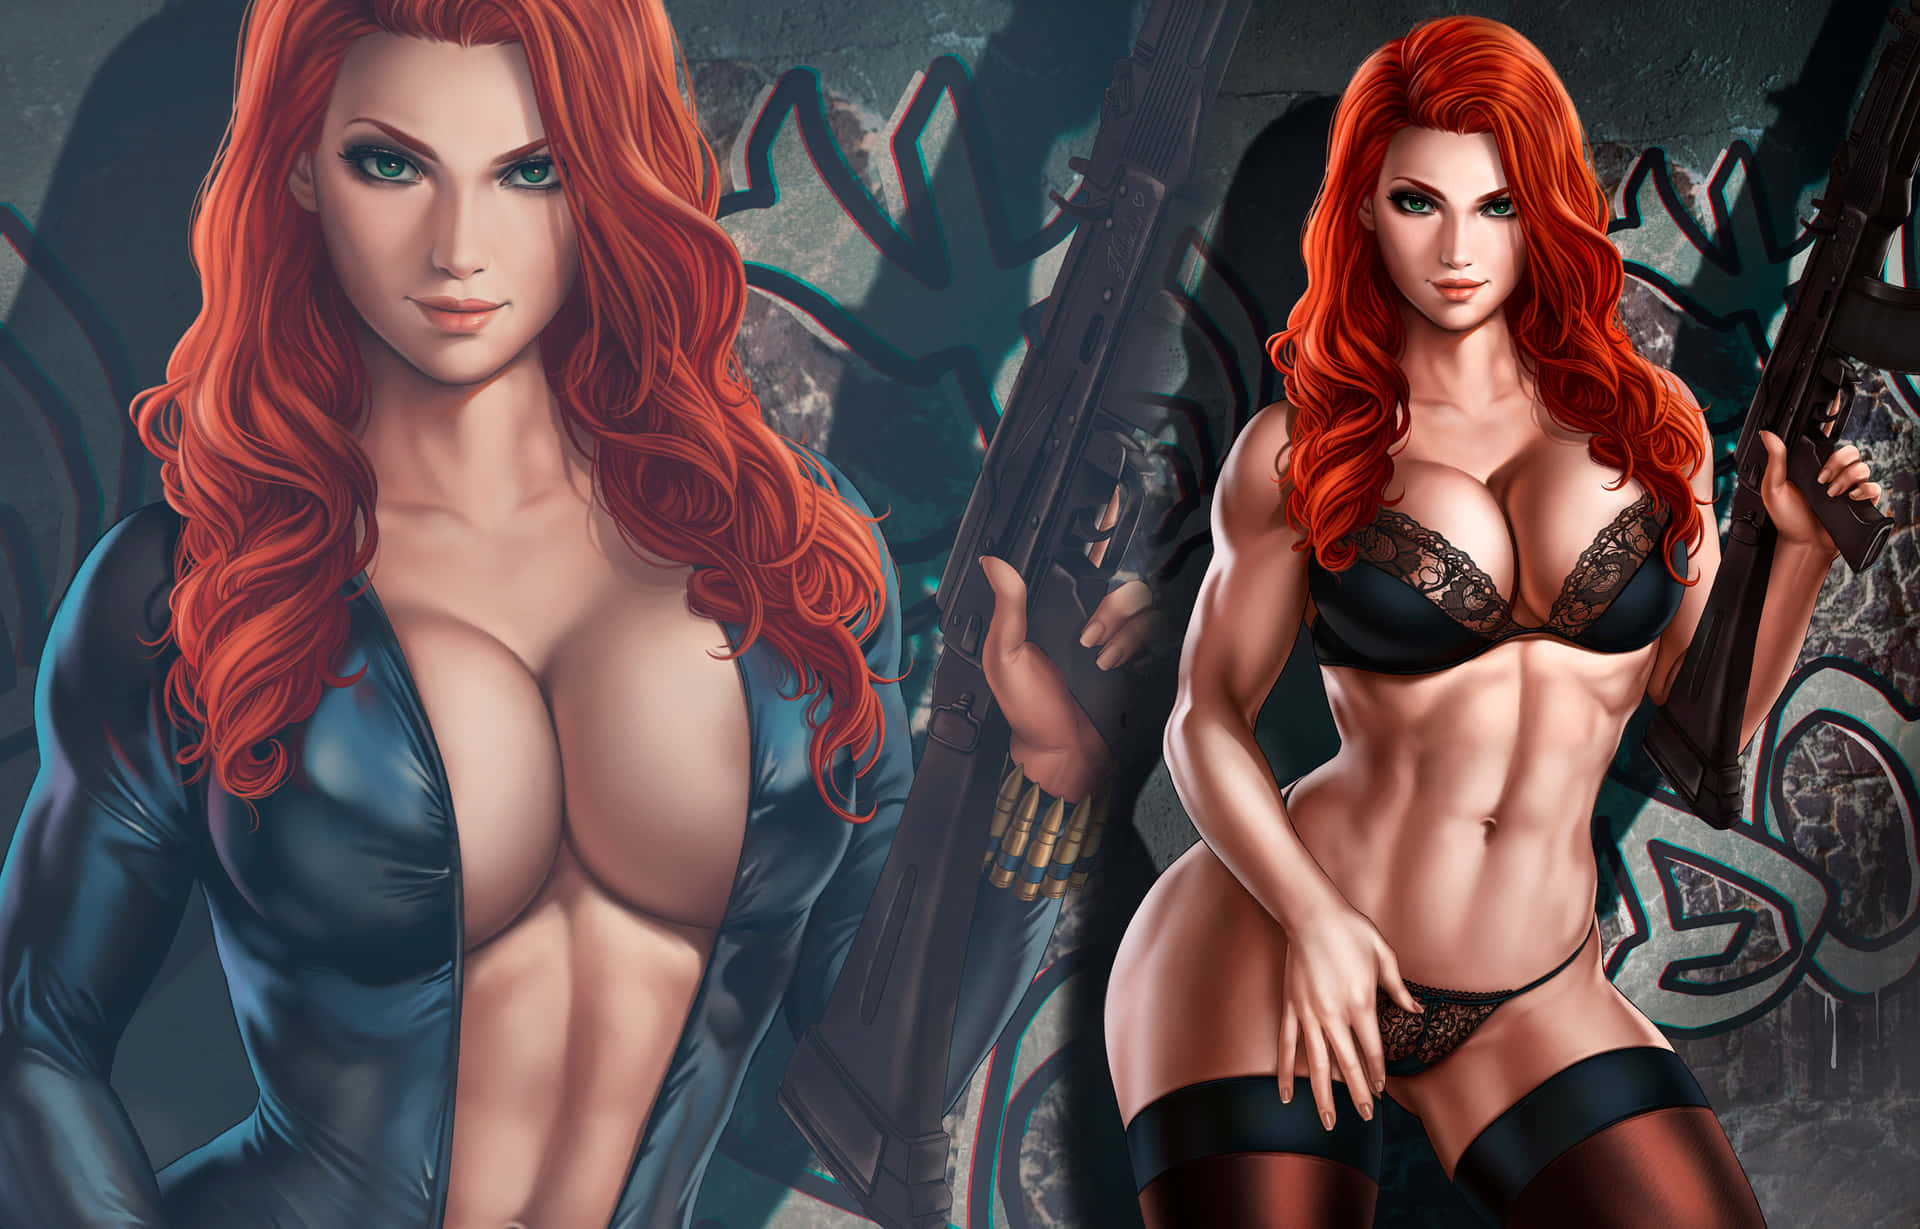 Sexy Image Of Muscular Redhead Wallpaper